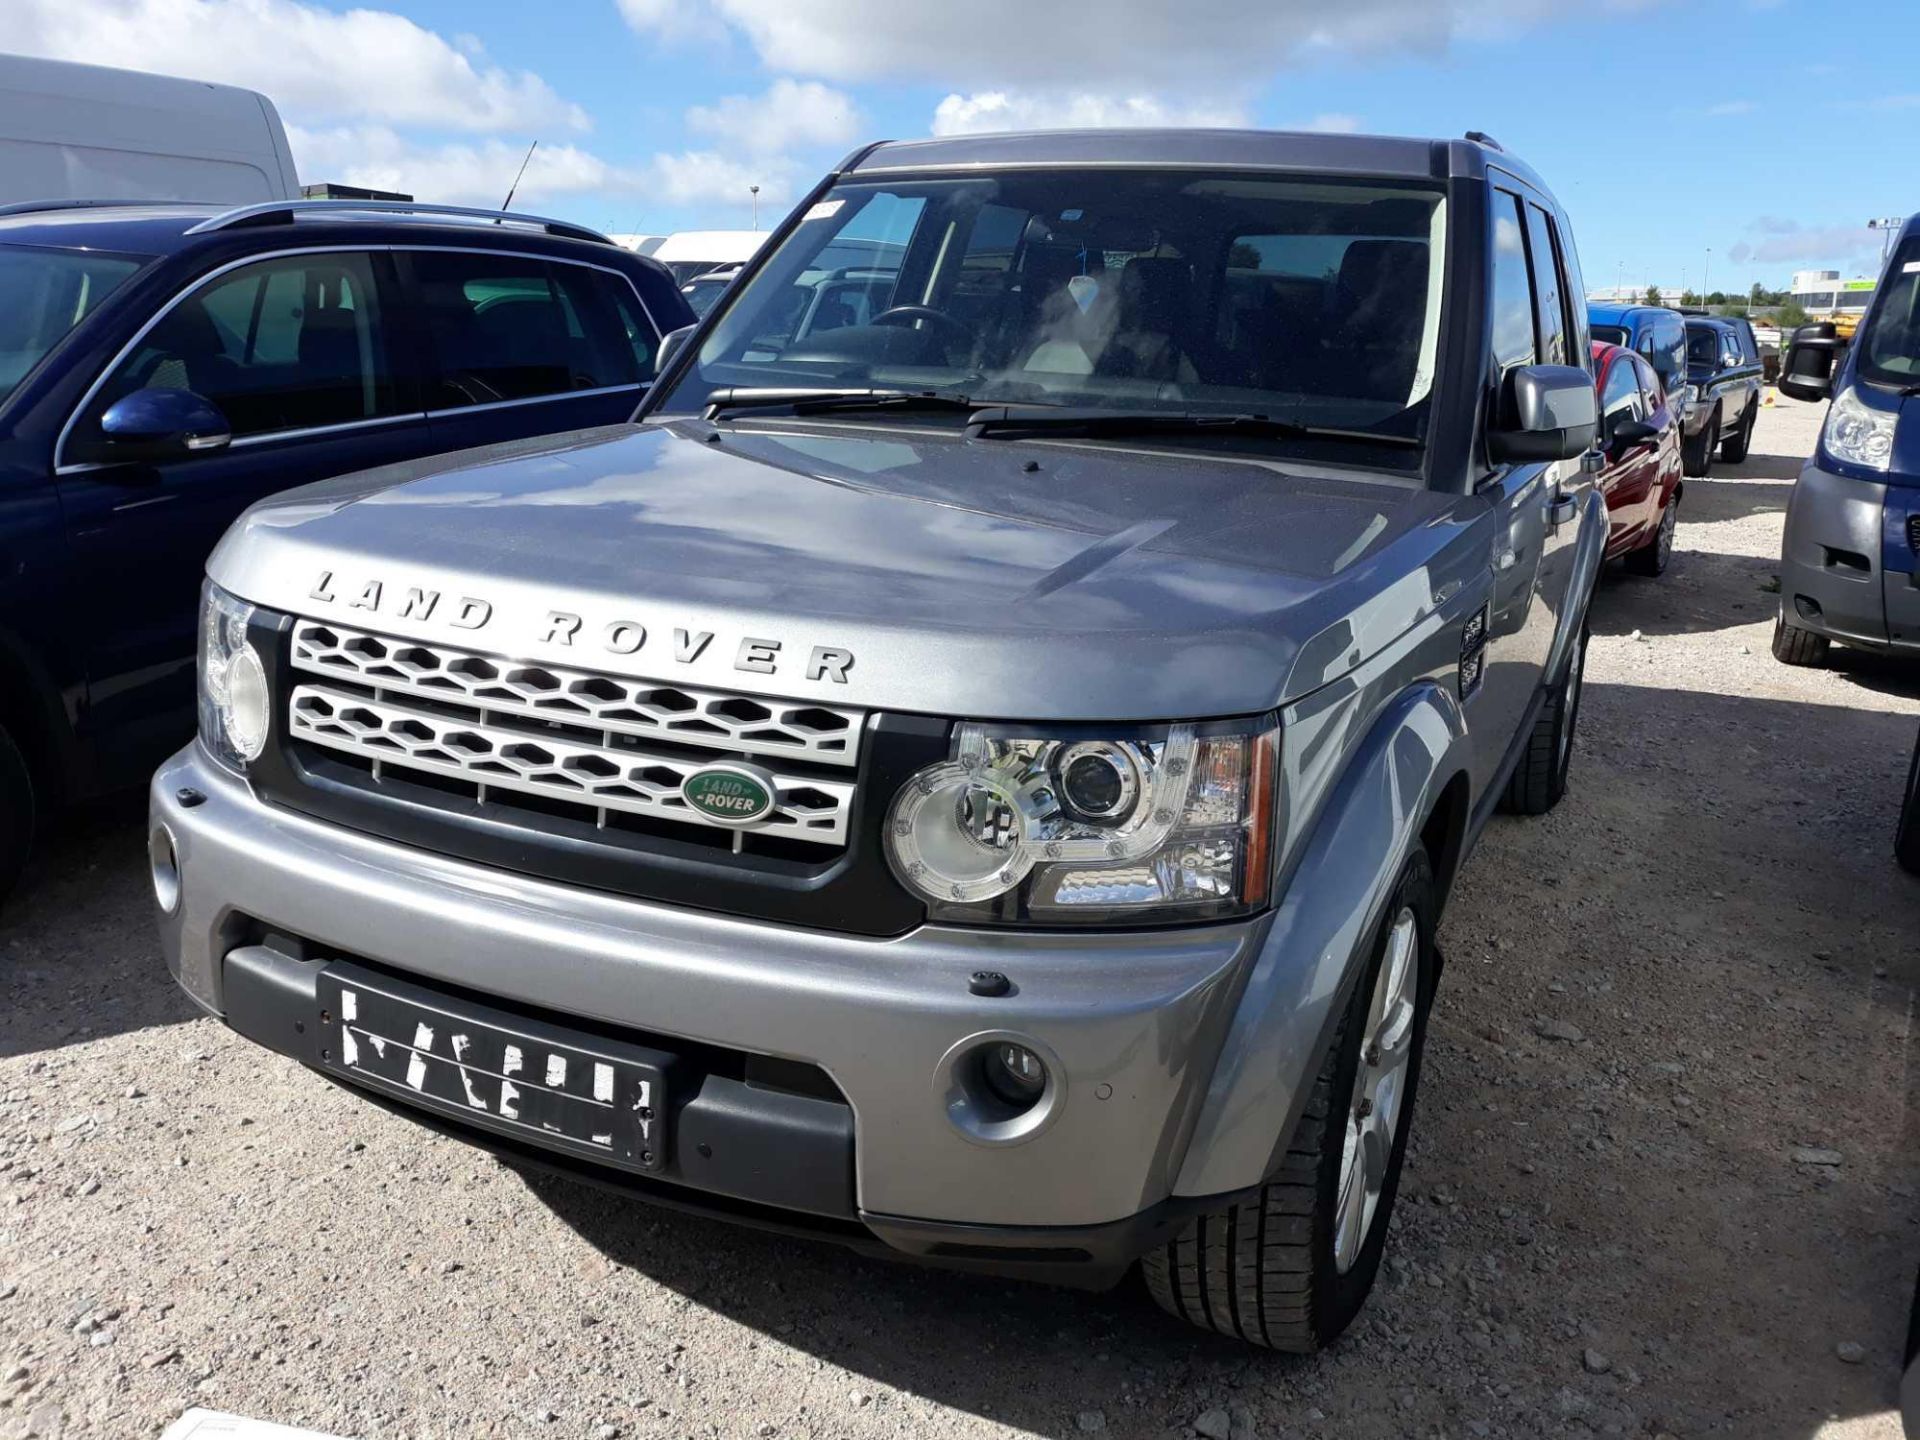 Land Rover Discovery Hse Sdv6 Auto - 2993cc Estate - Image 7 of 8